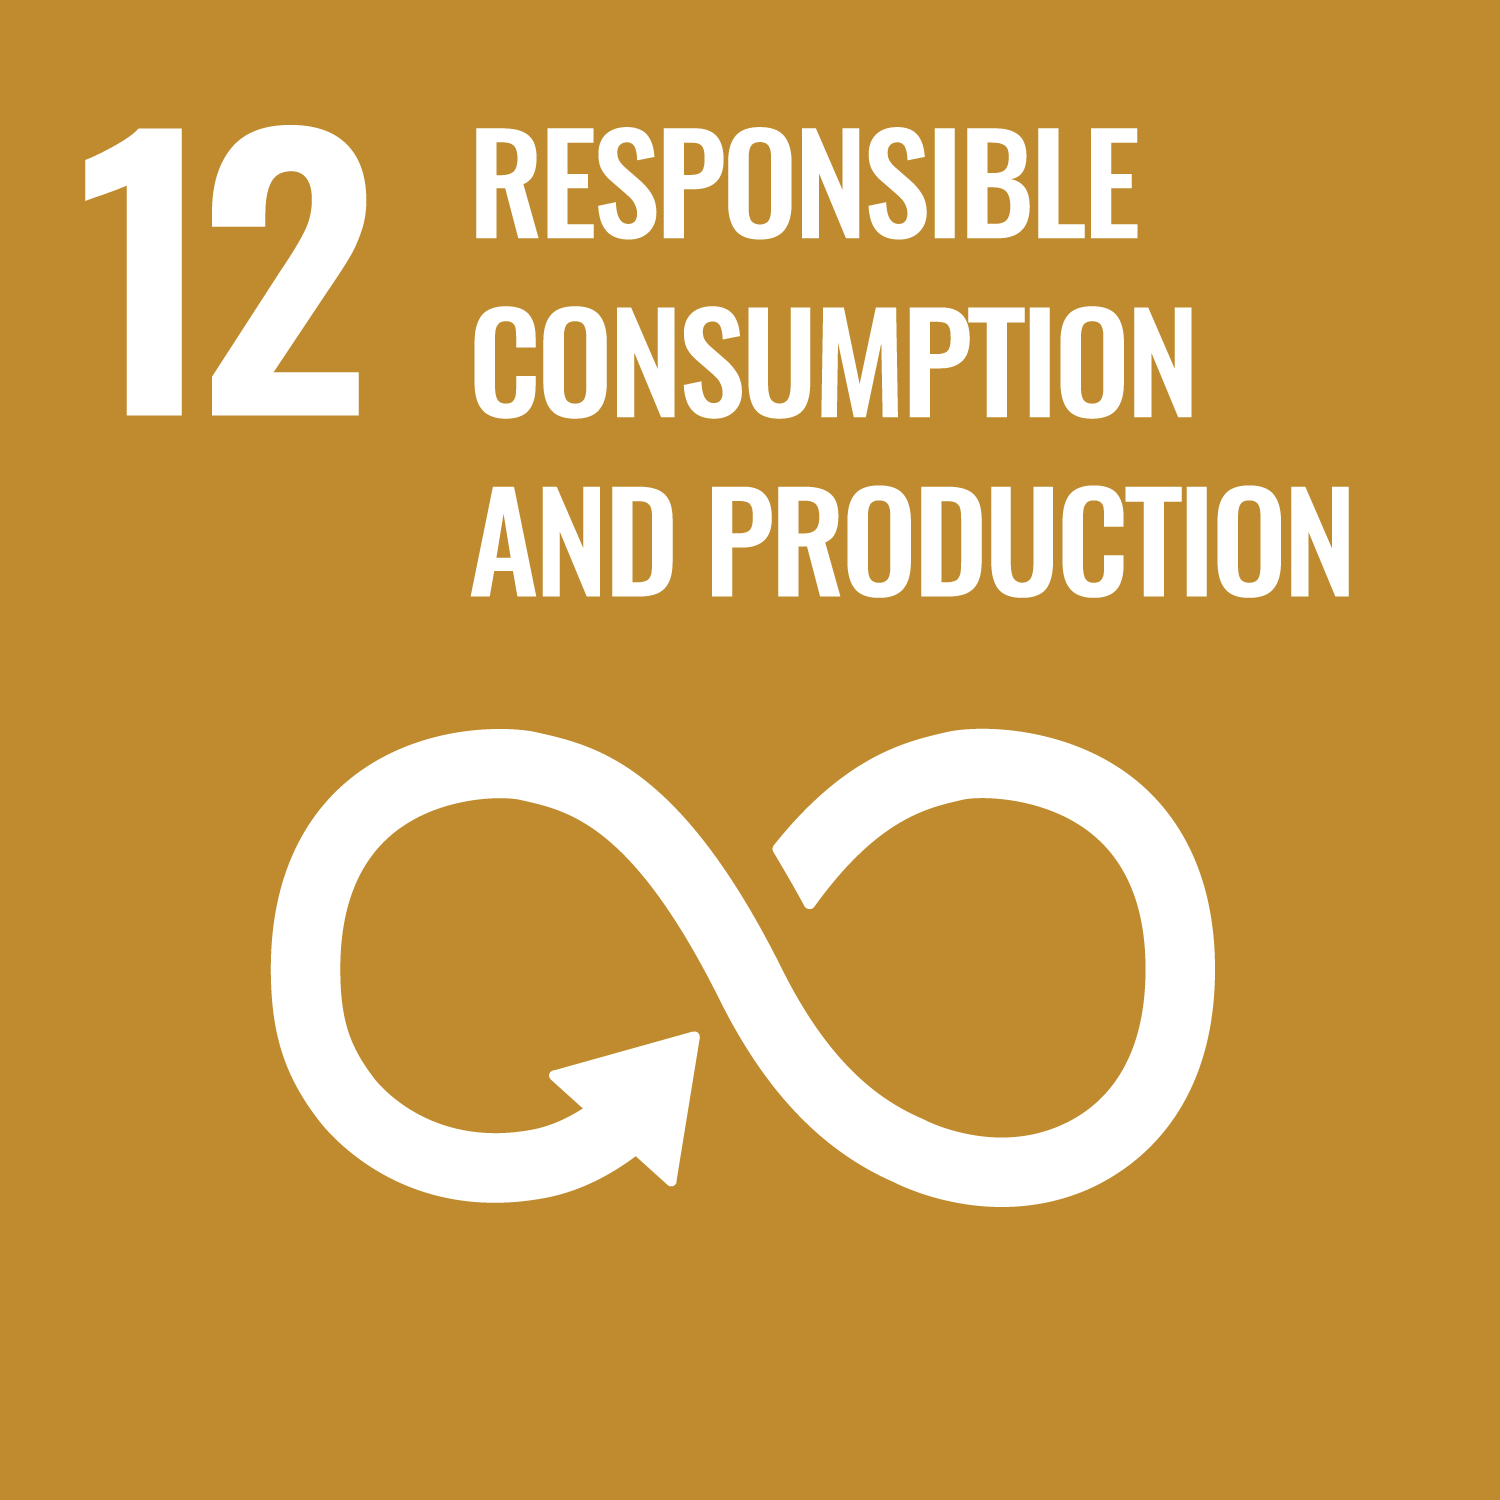 Goal 12 - Responsible Consumption and Production